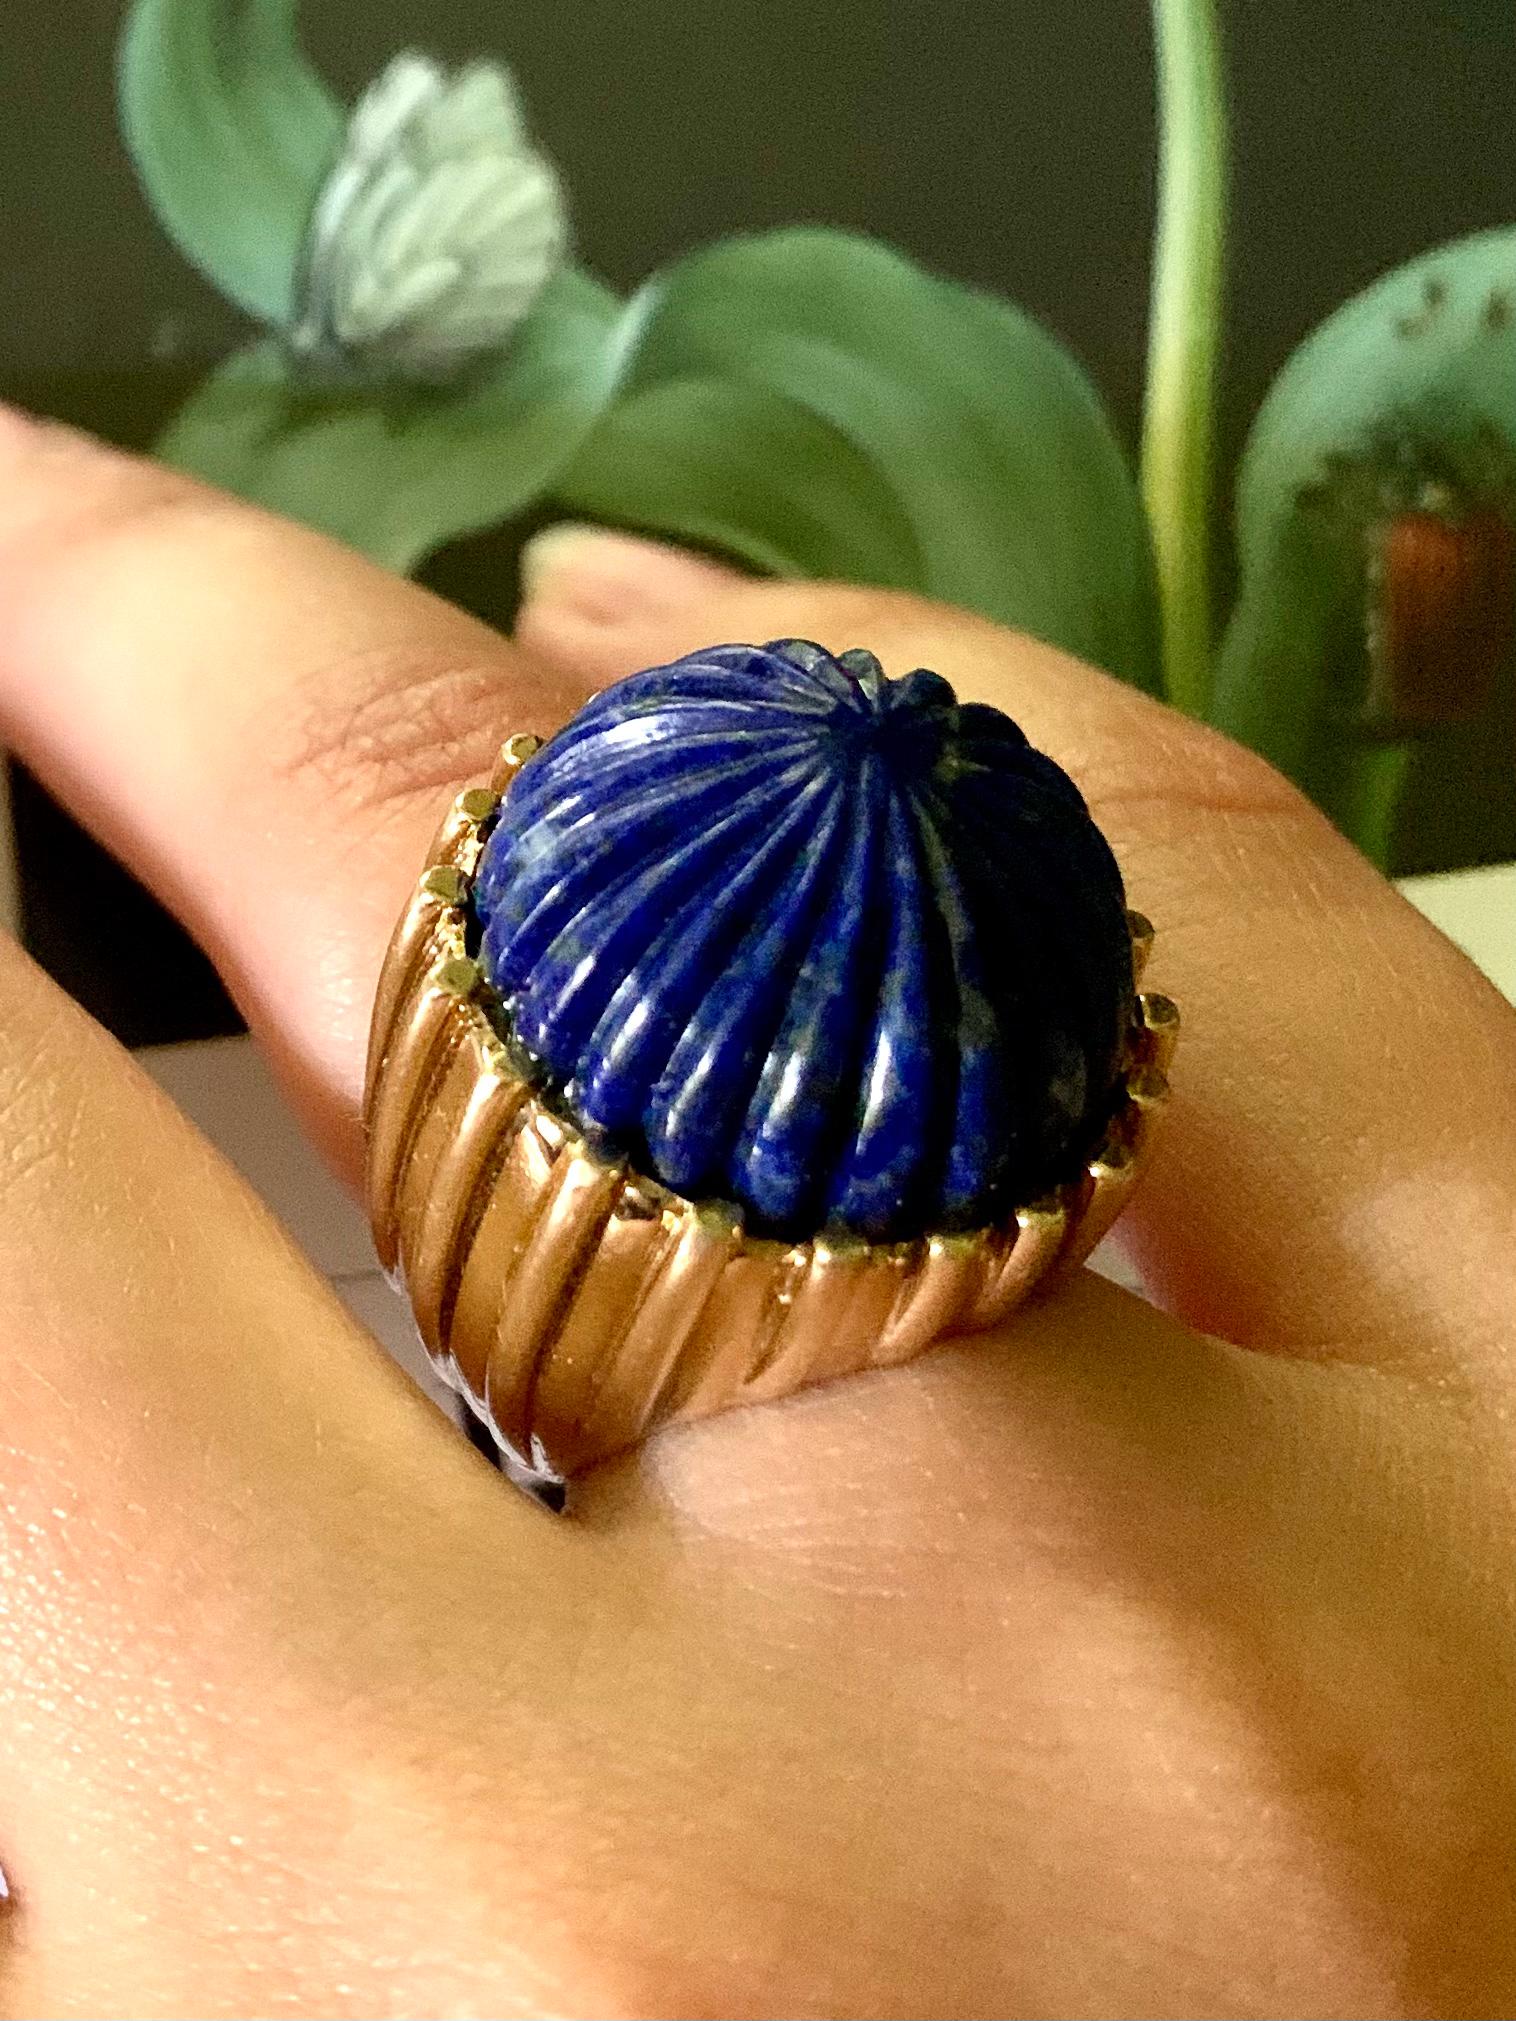 Impressive Classical Roman style carved Lapis Lazuli fluted 14K yellow gold statement ring. The carved Lapis Lazuli measuring 20mm in diameter, set in a substantial fluted gold setting which complements the carved design. Well proportioned, fine